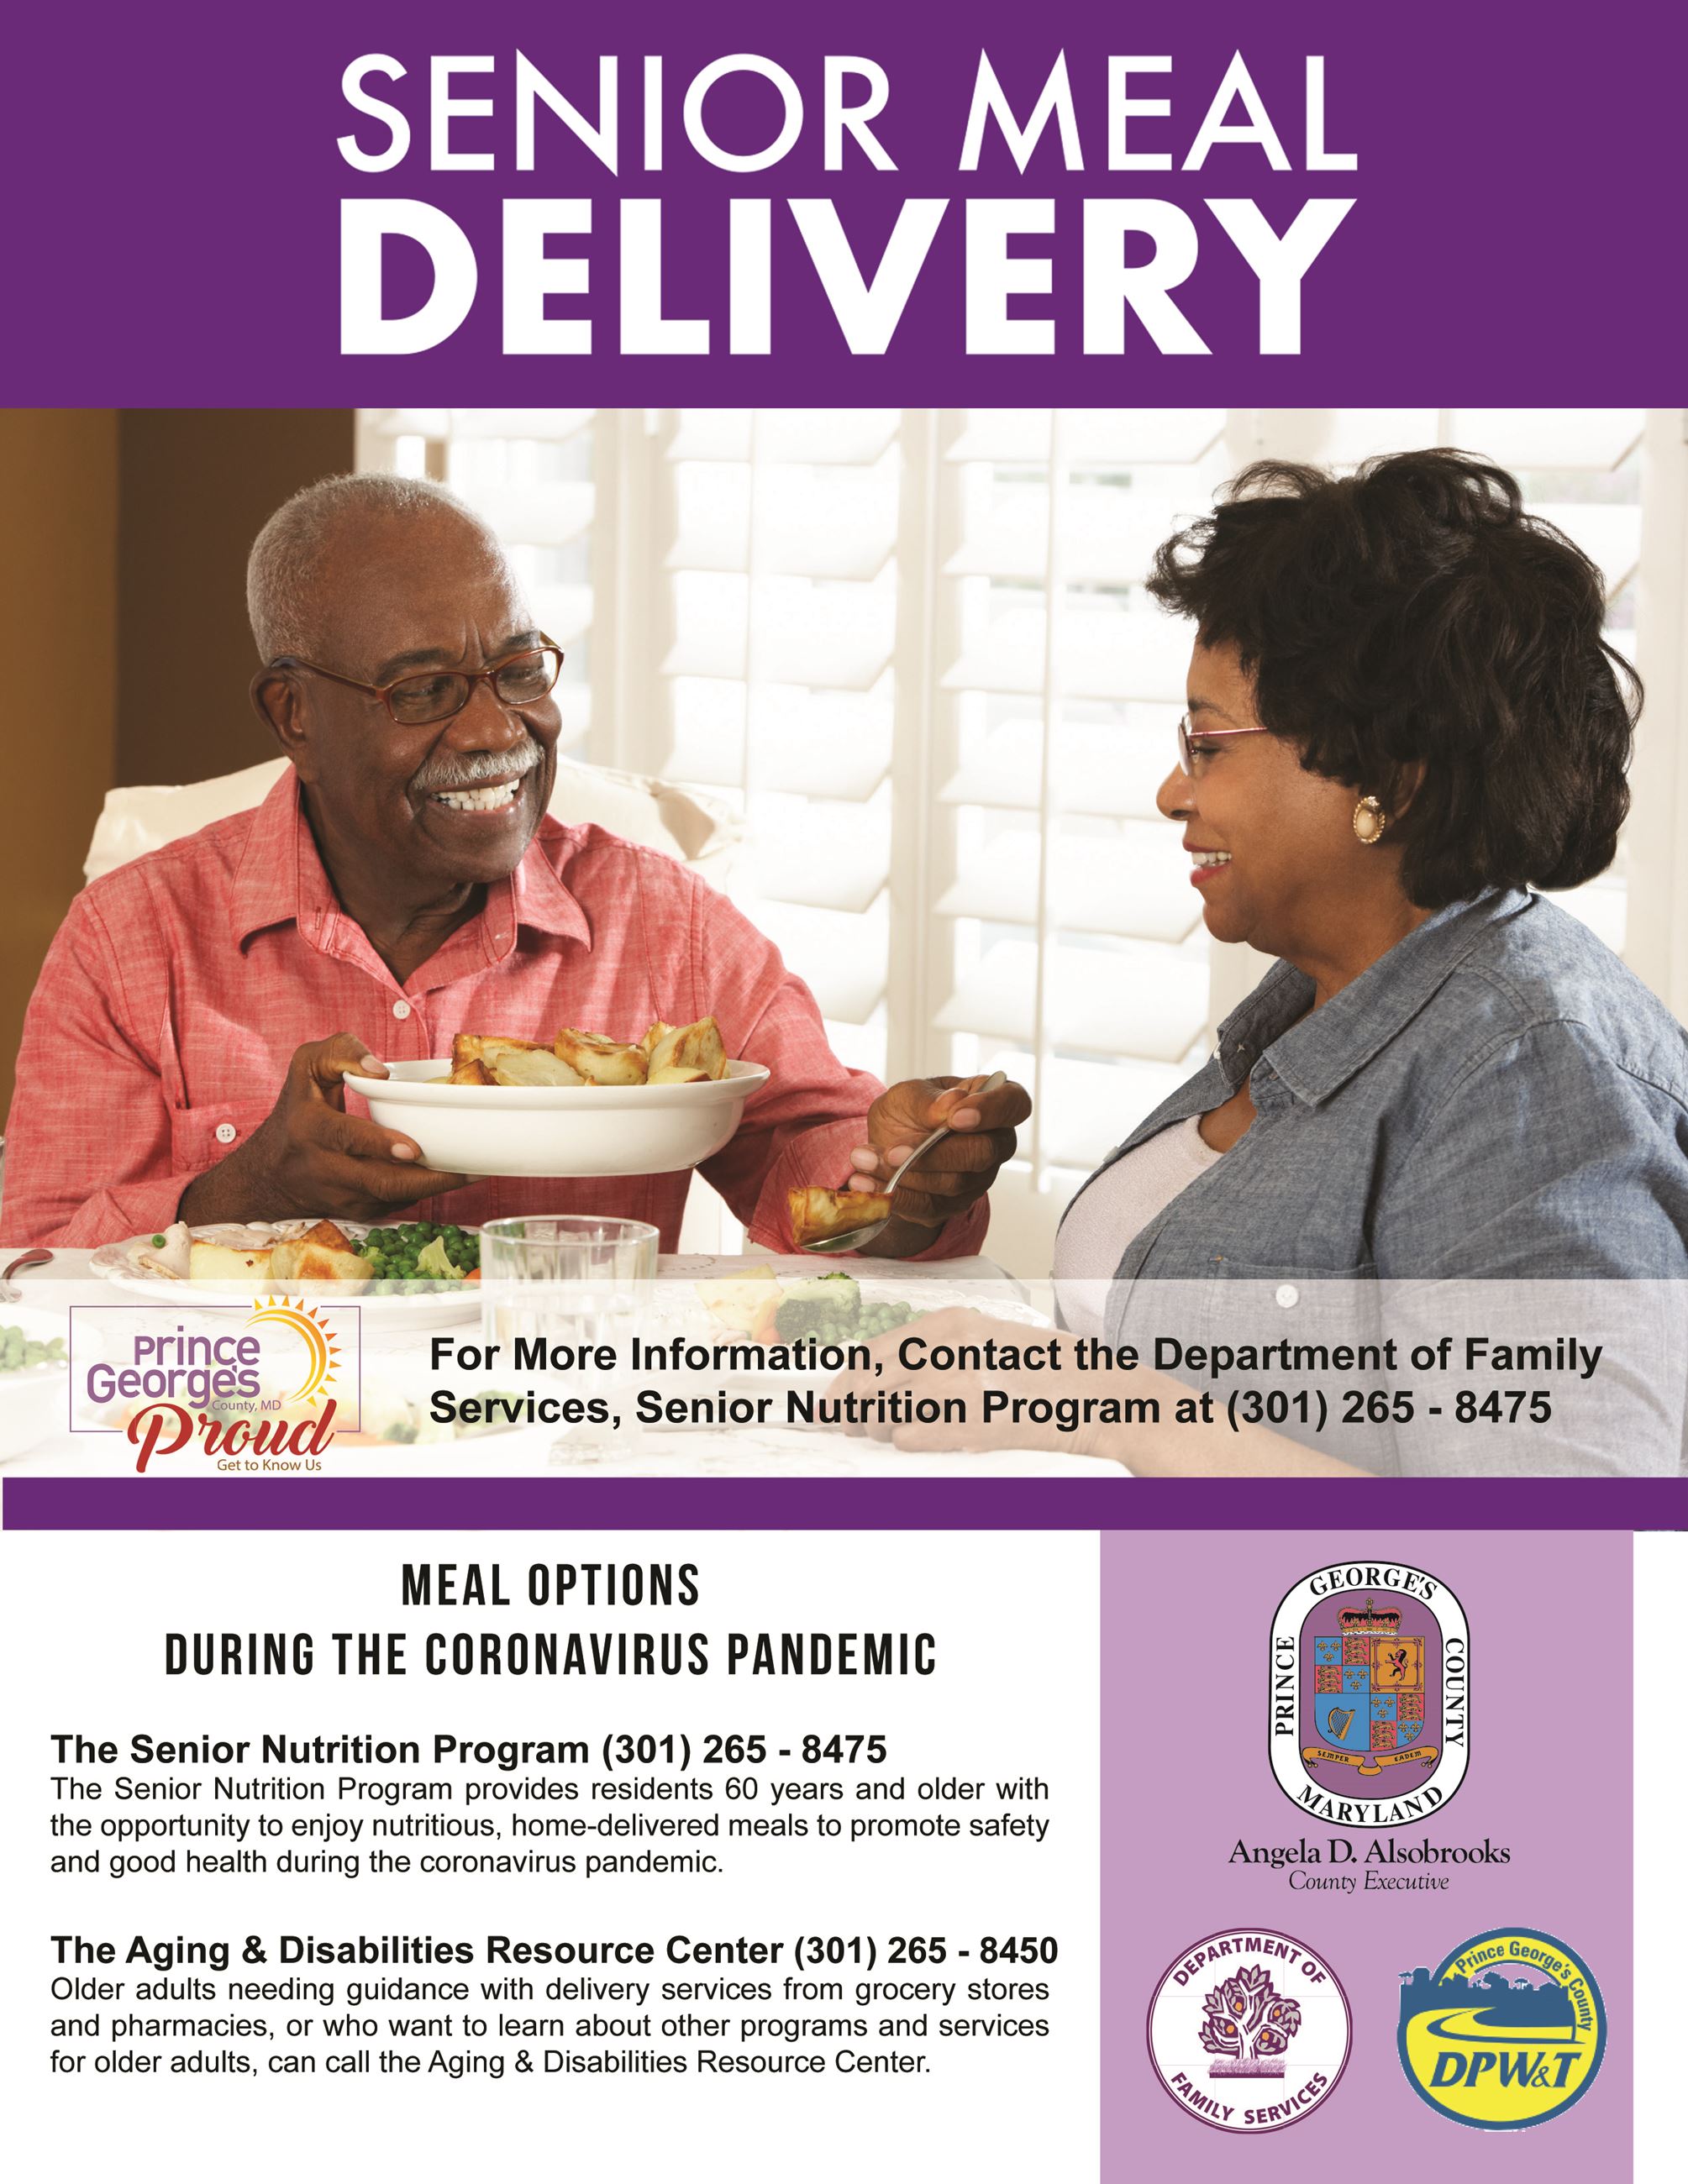 Programs and services for seniors 